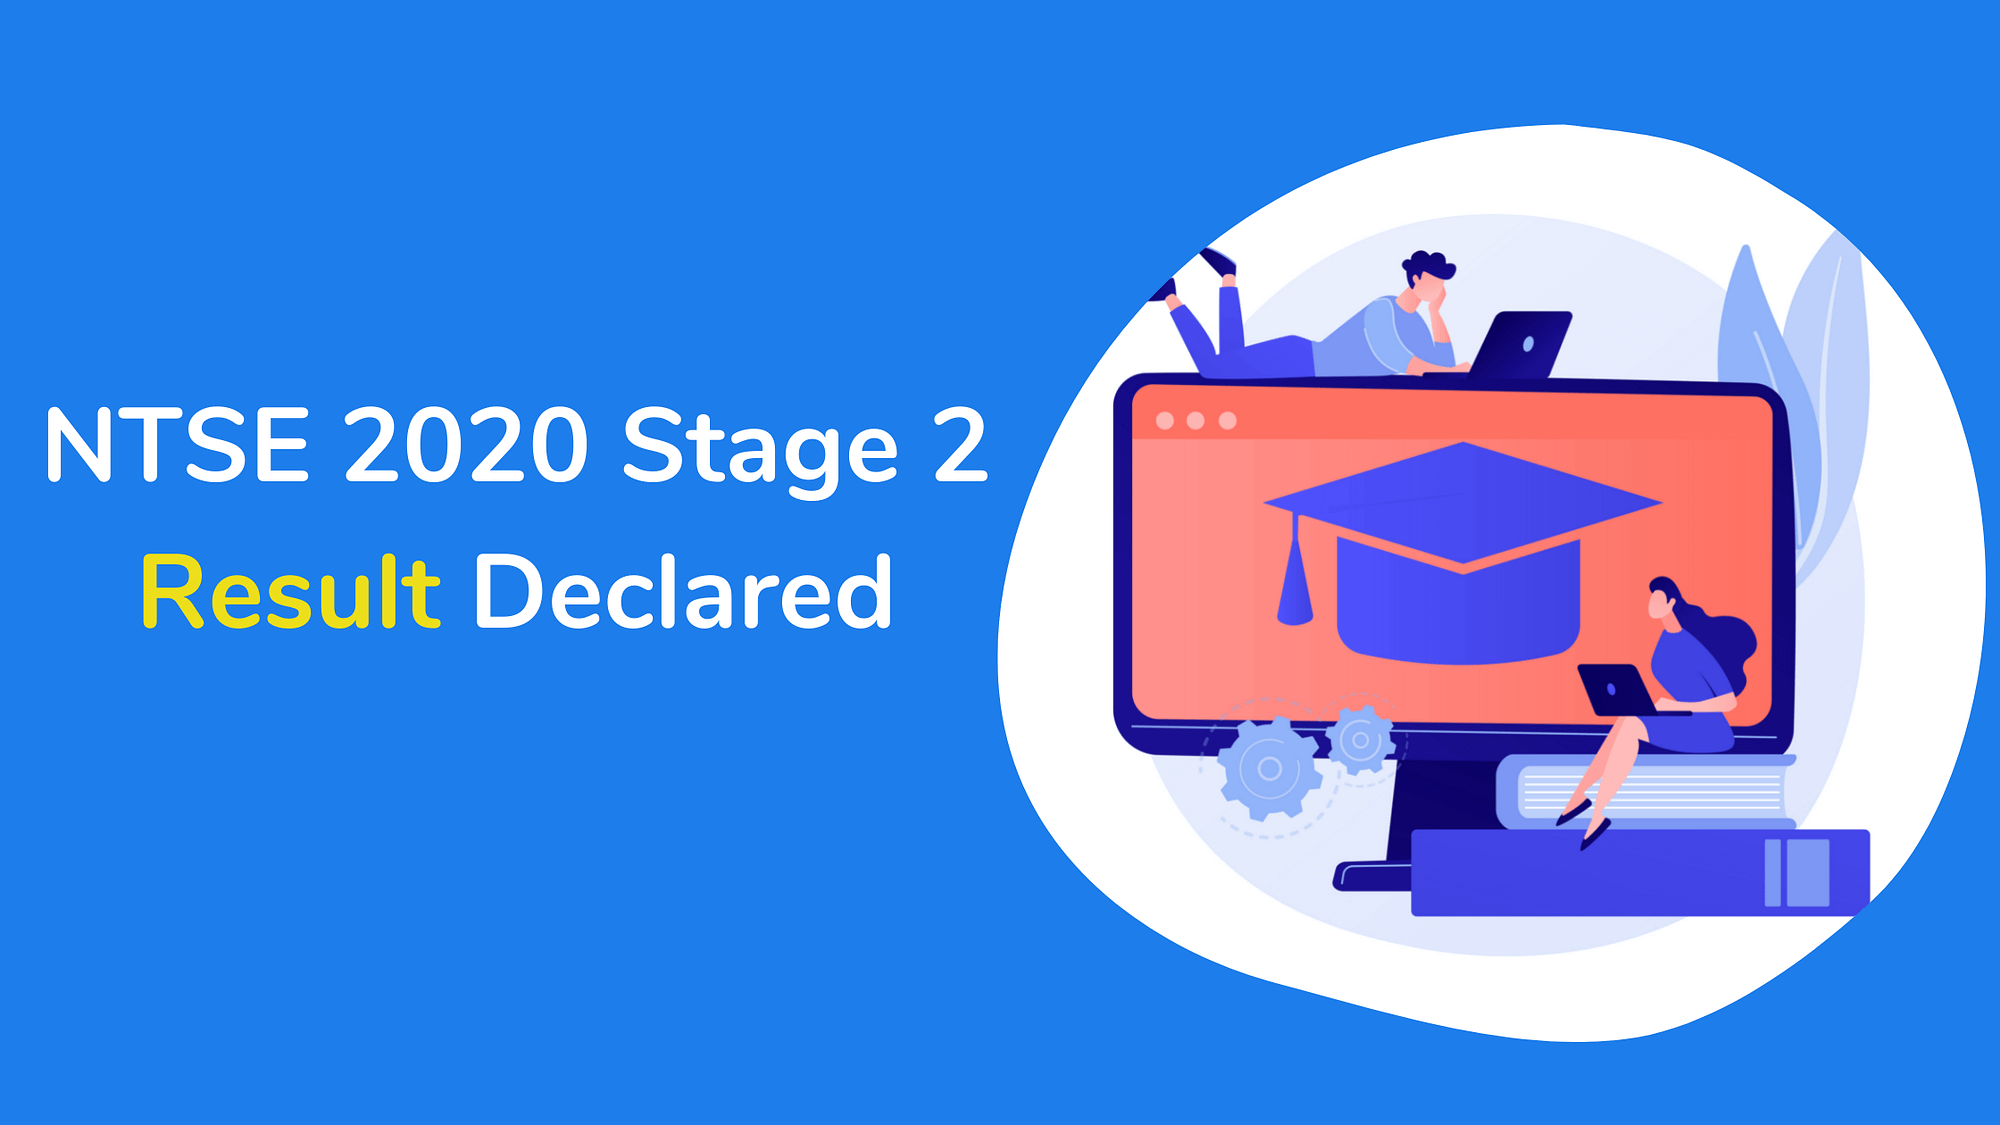 NTSE 2020 Stage 2 result declared, Check Details Here